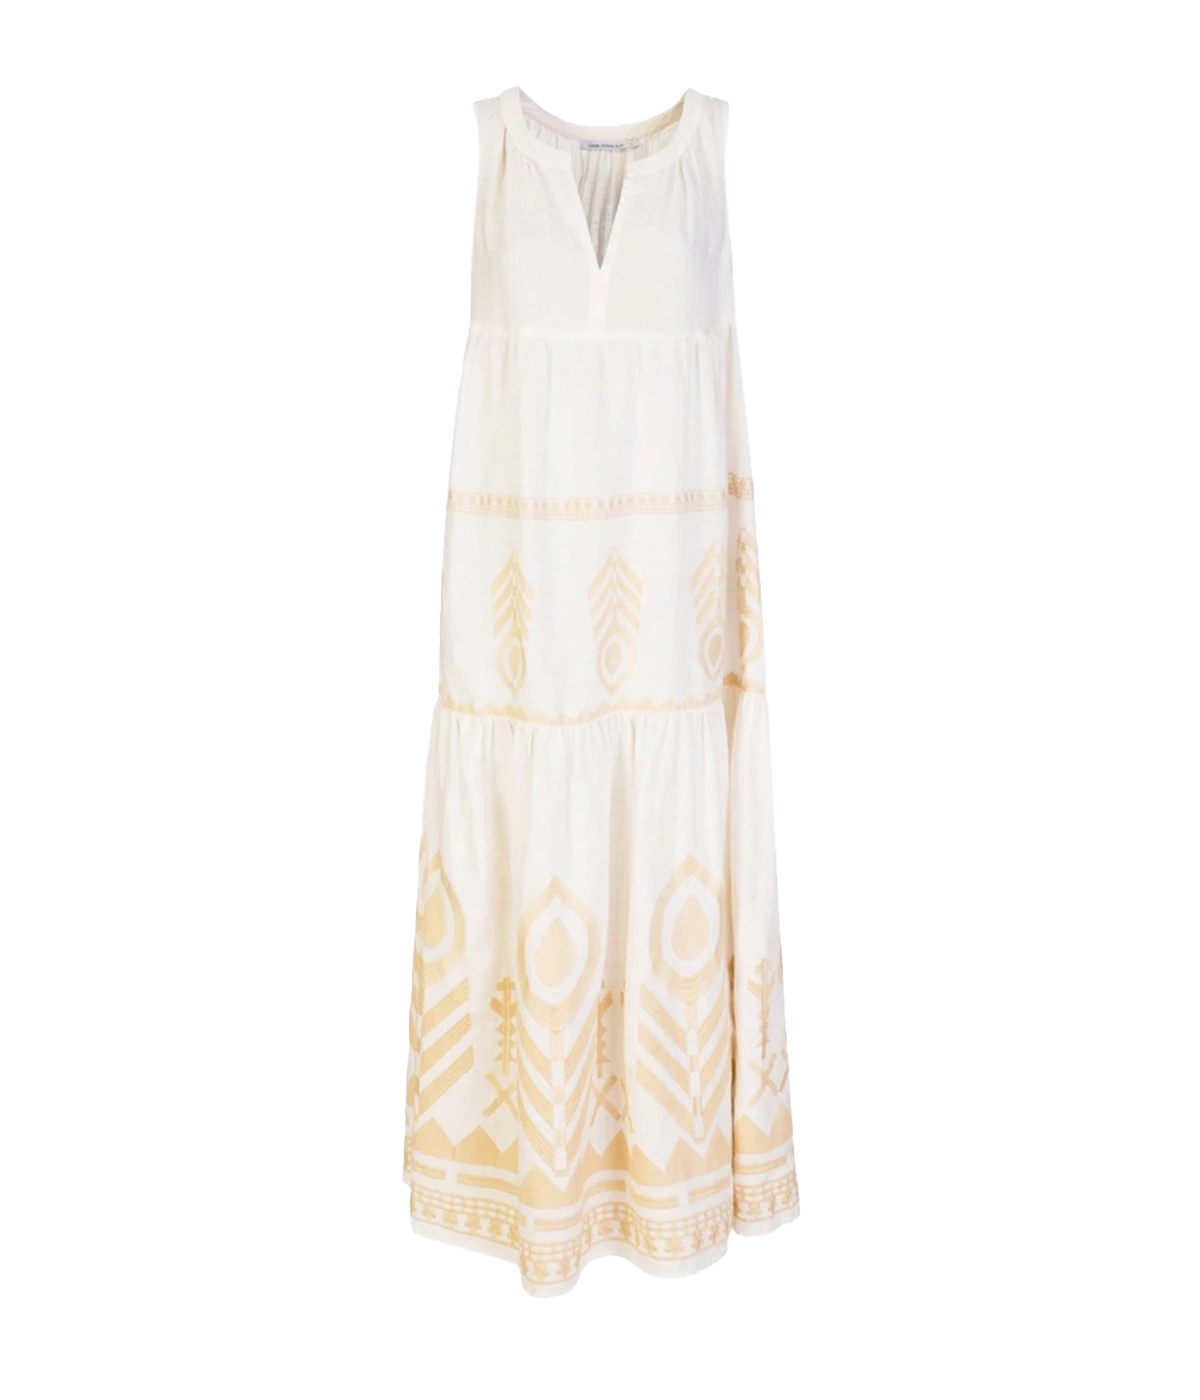 A maxi style sleeveless dress in while and gold embroidery,  greece inspired. V neckline, sleevess, bra friendly, ruffle hemline, made in greece, throw on and go, summer dress. 